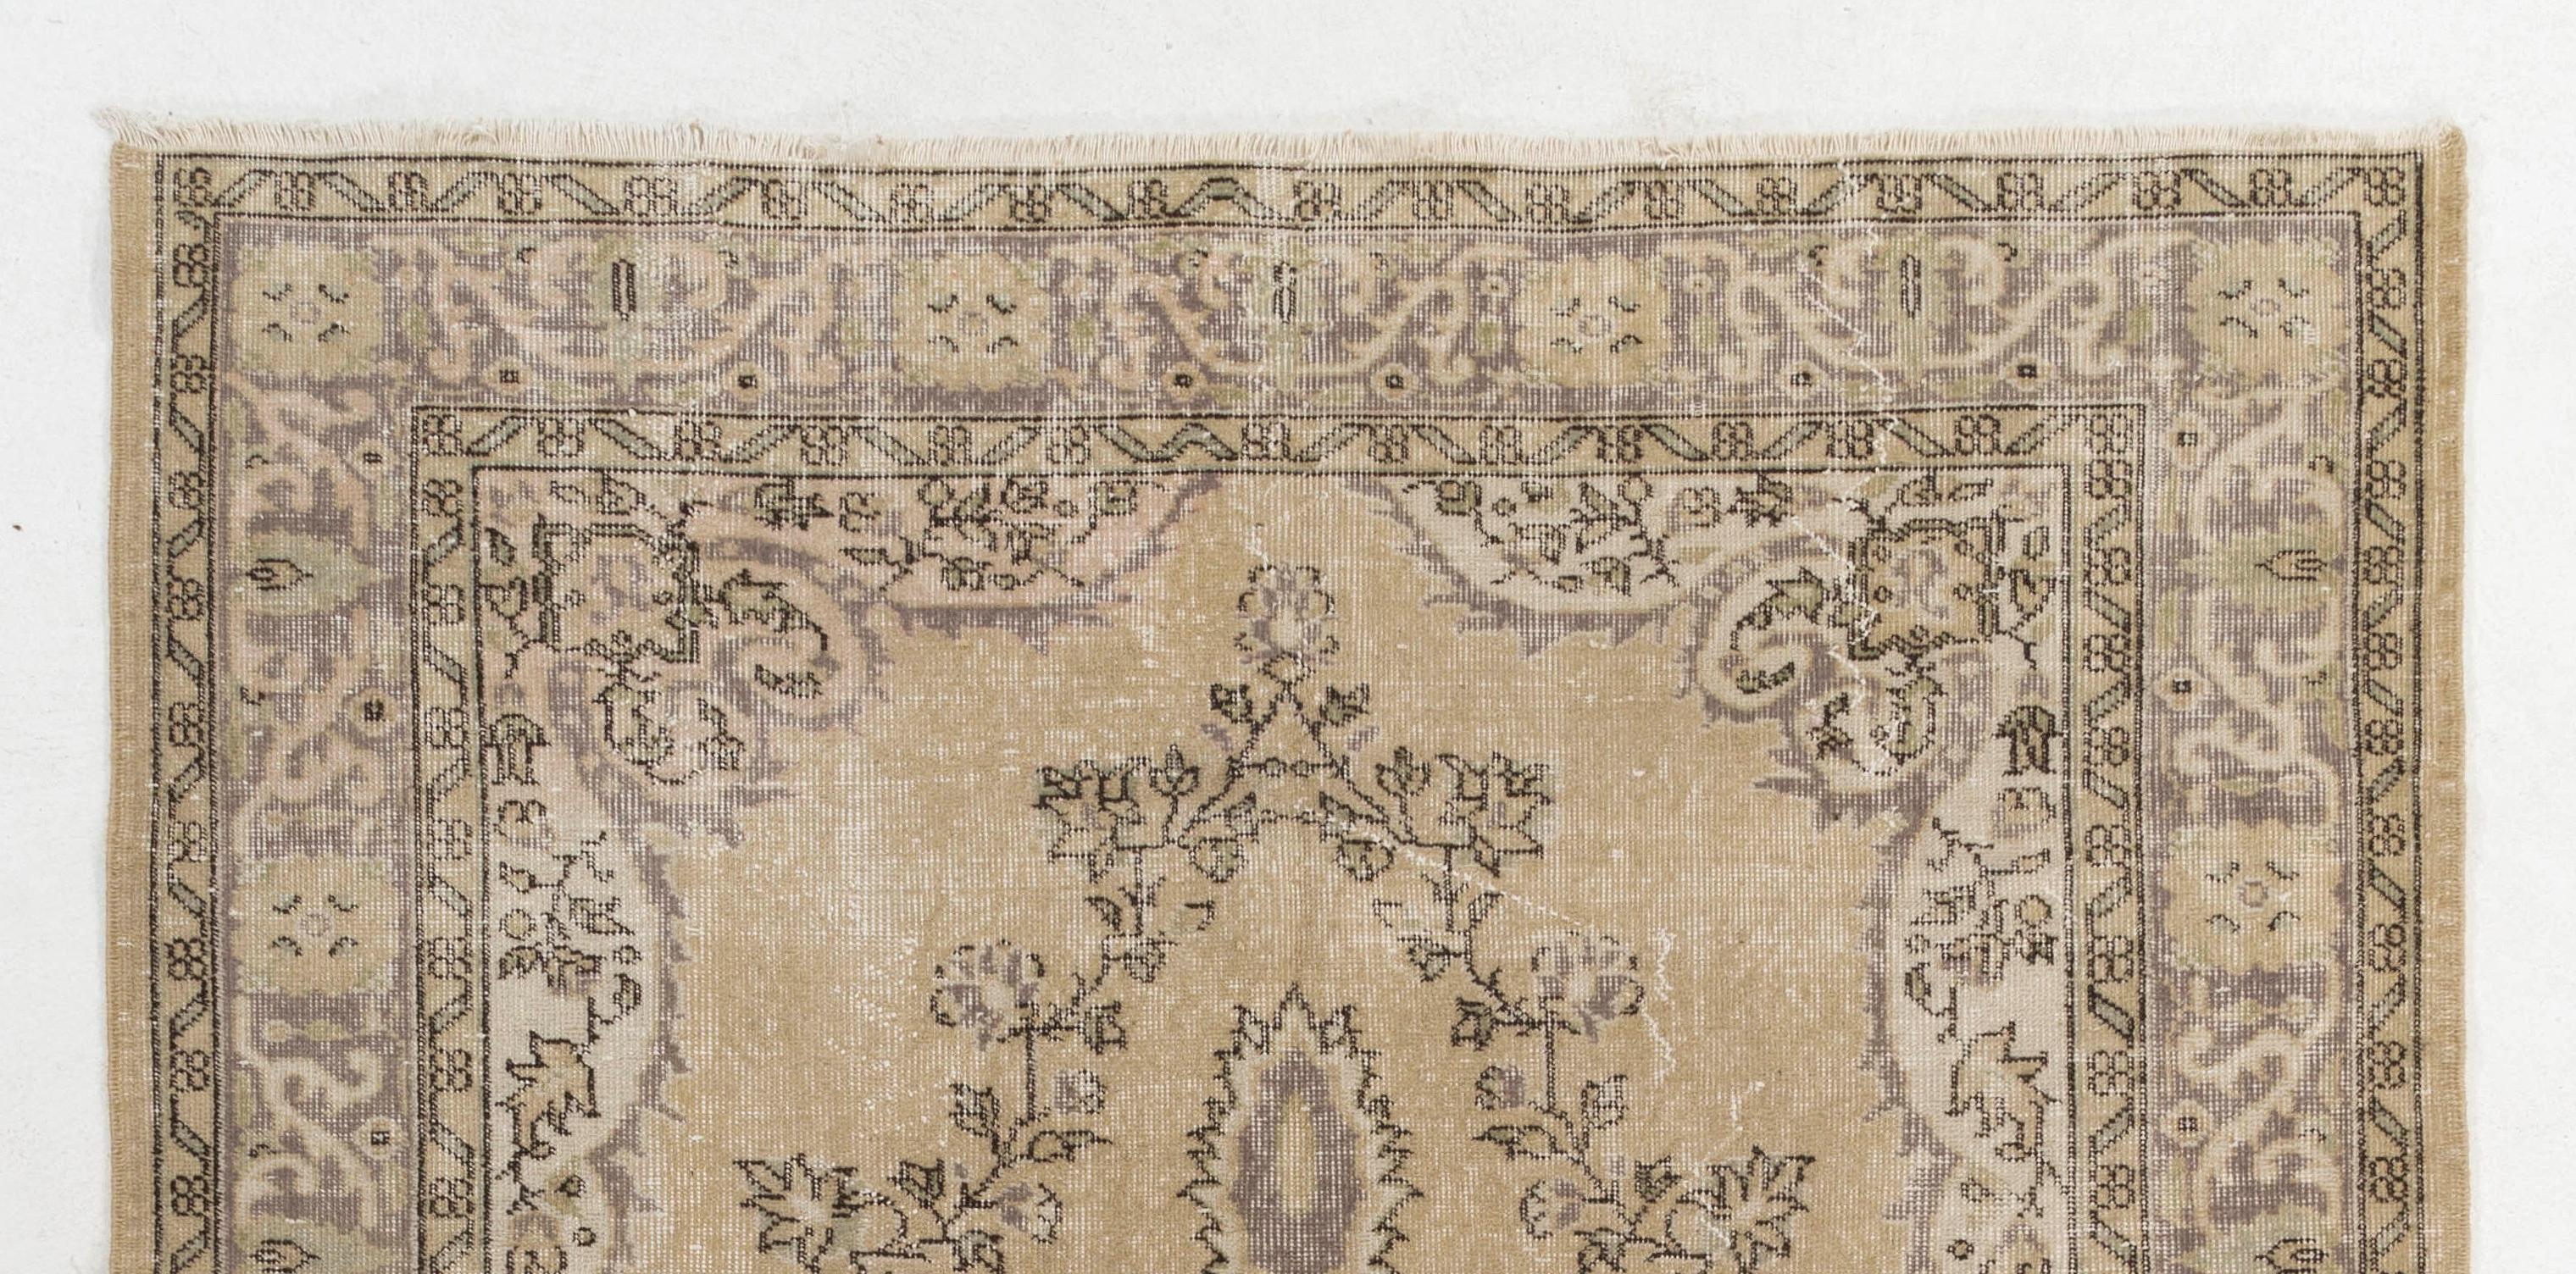 A finely hand knotted vintage Turkish carpet from the 1960s featuring an elegant medallion design decorated all around with a floral wreath in beige and taupe gray against a buttermilk yellow . The rug has even low wool pile on cotton foundation. It